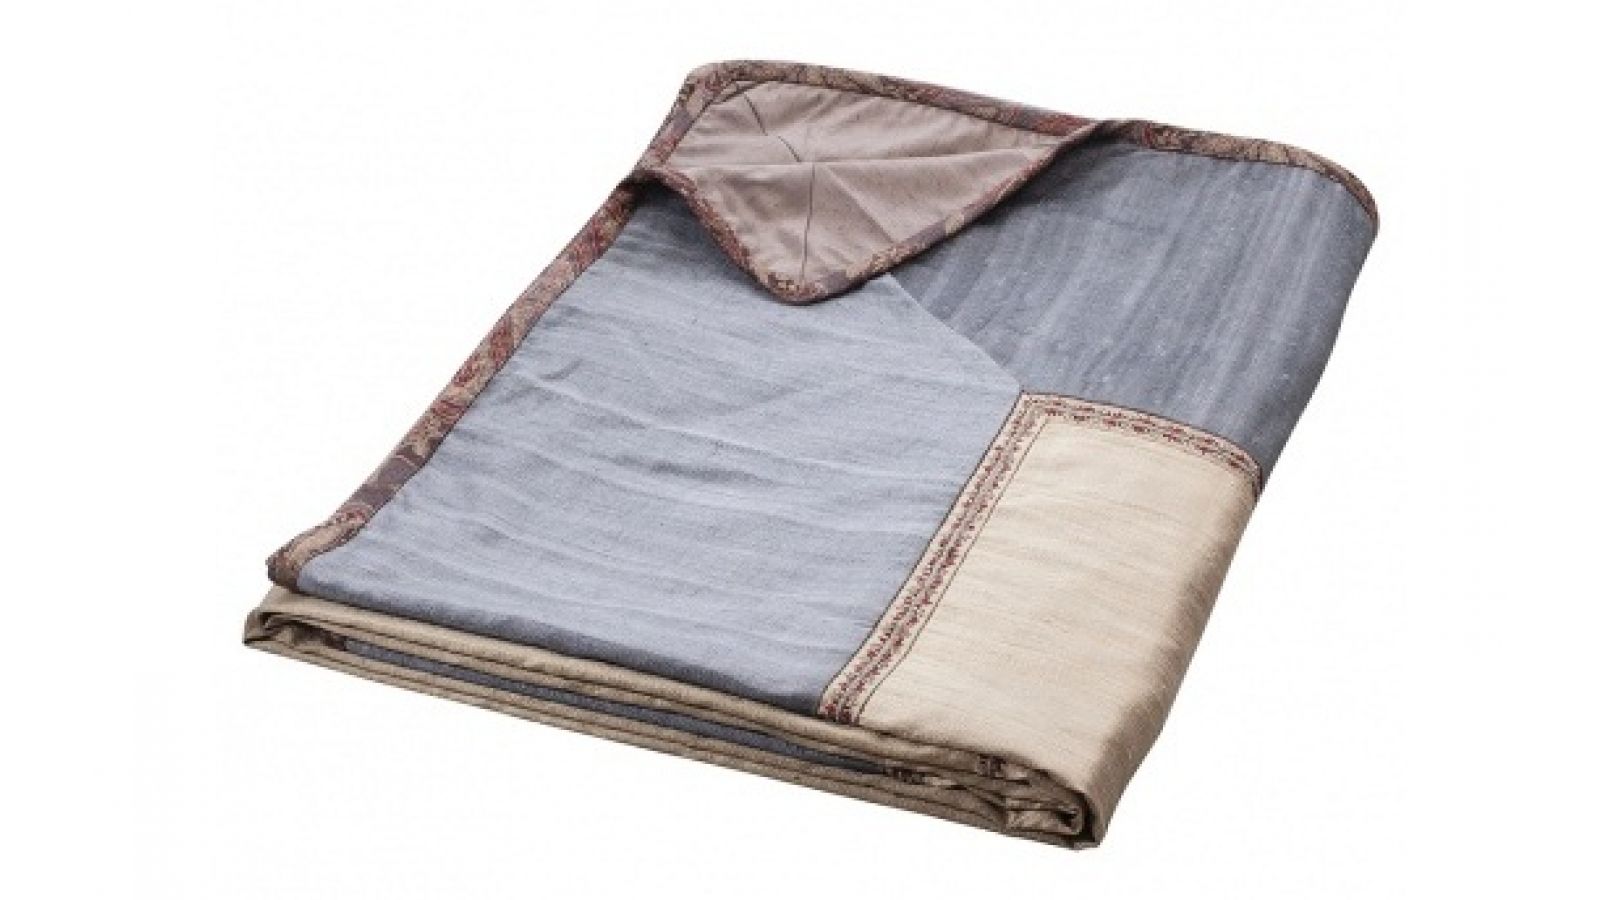 Luxury Bedspreads at Reasonable Price only at Aztaro